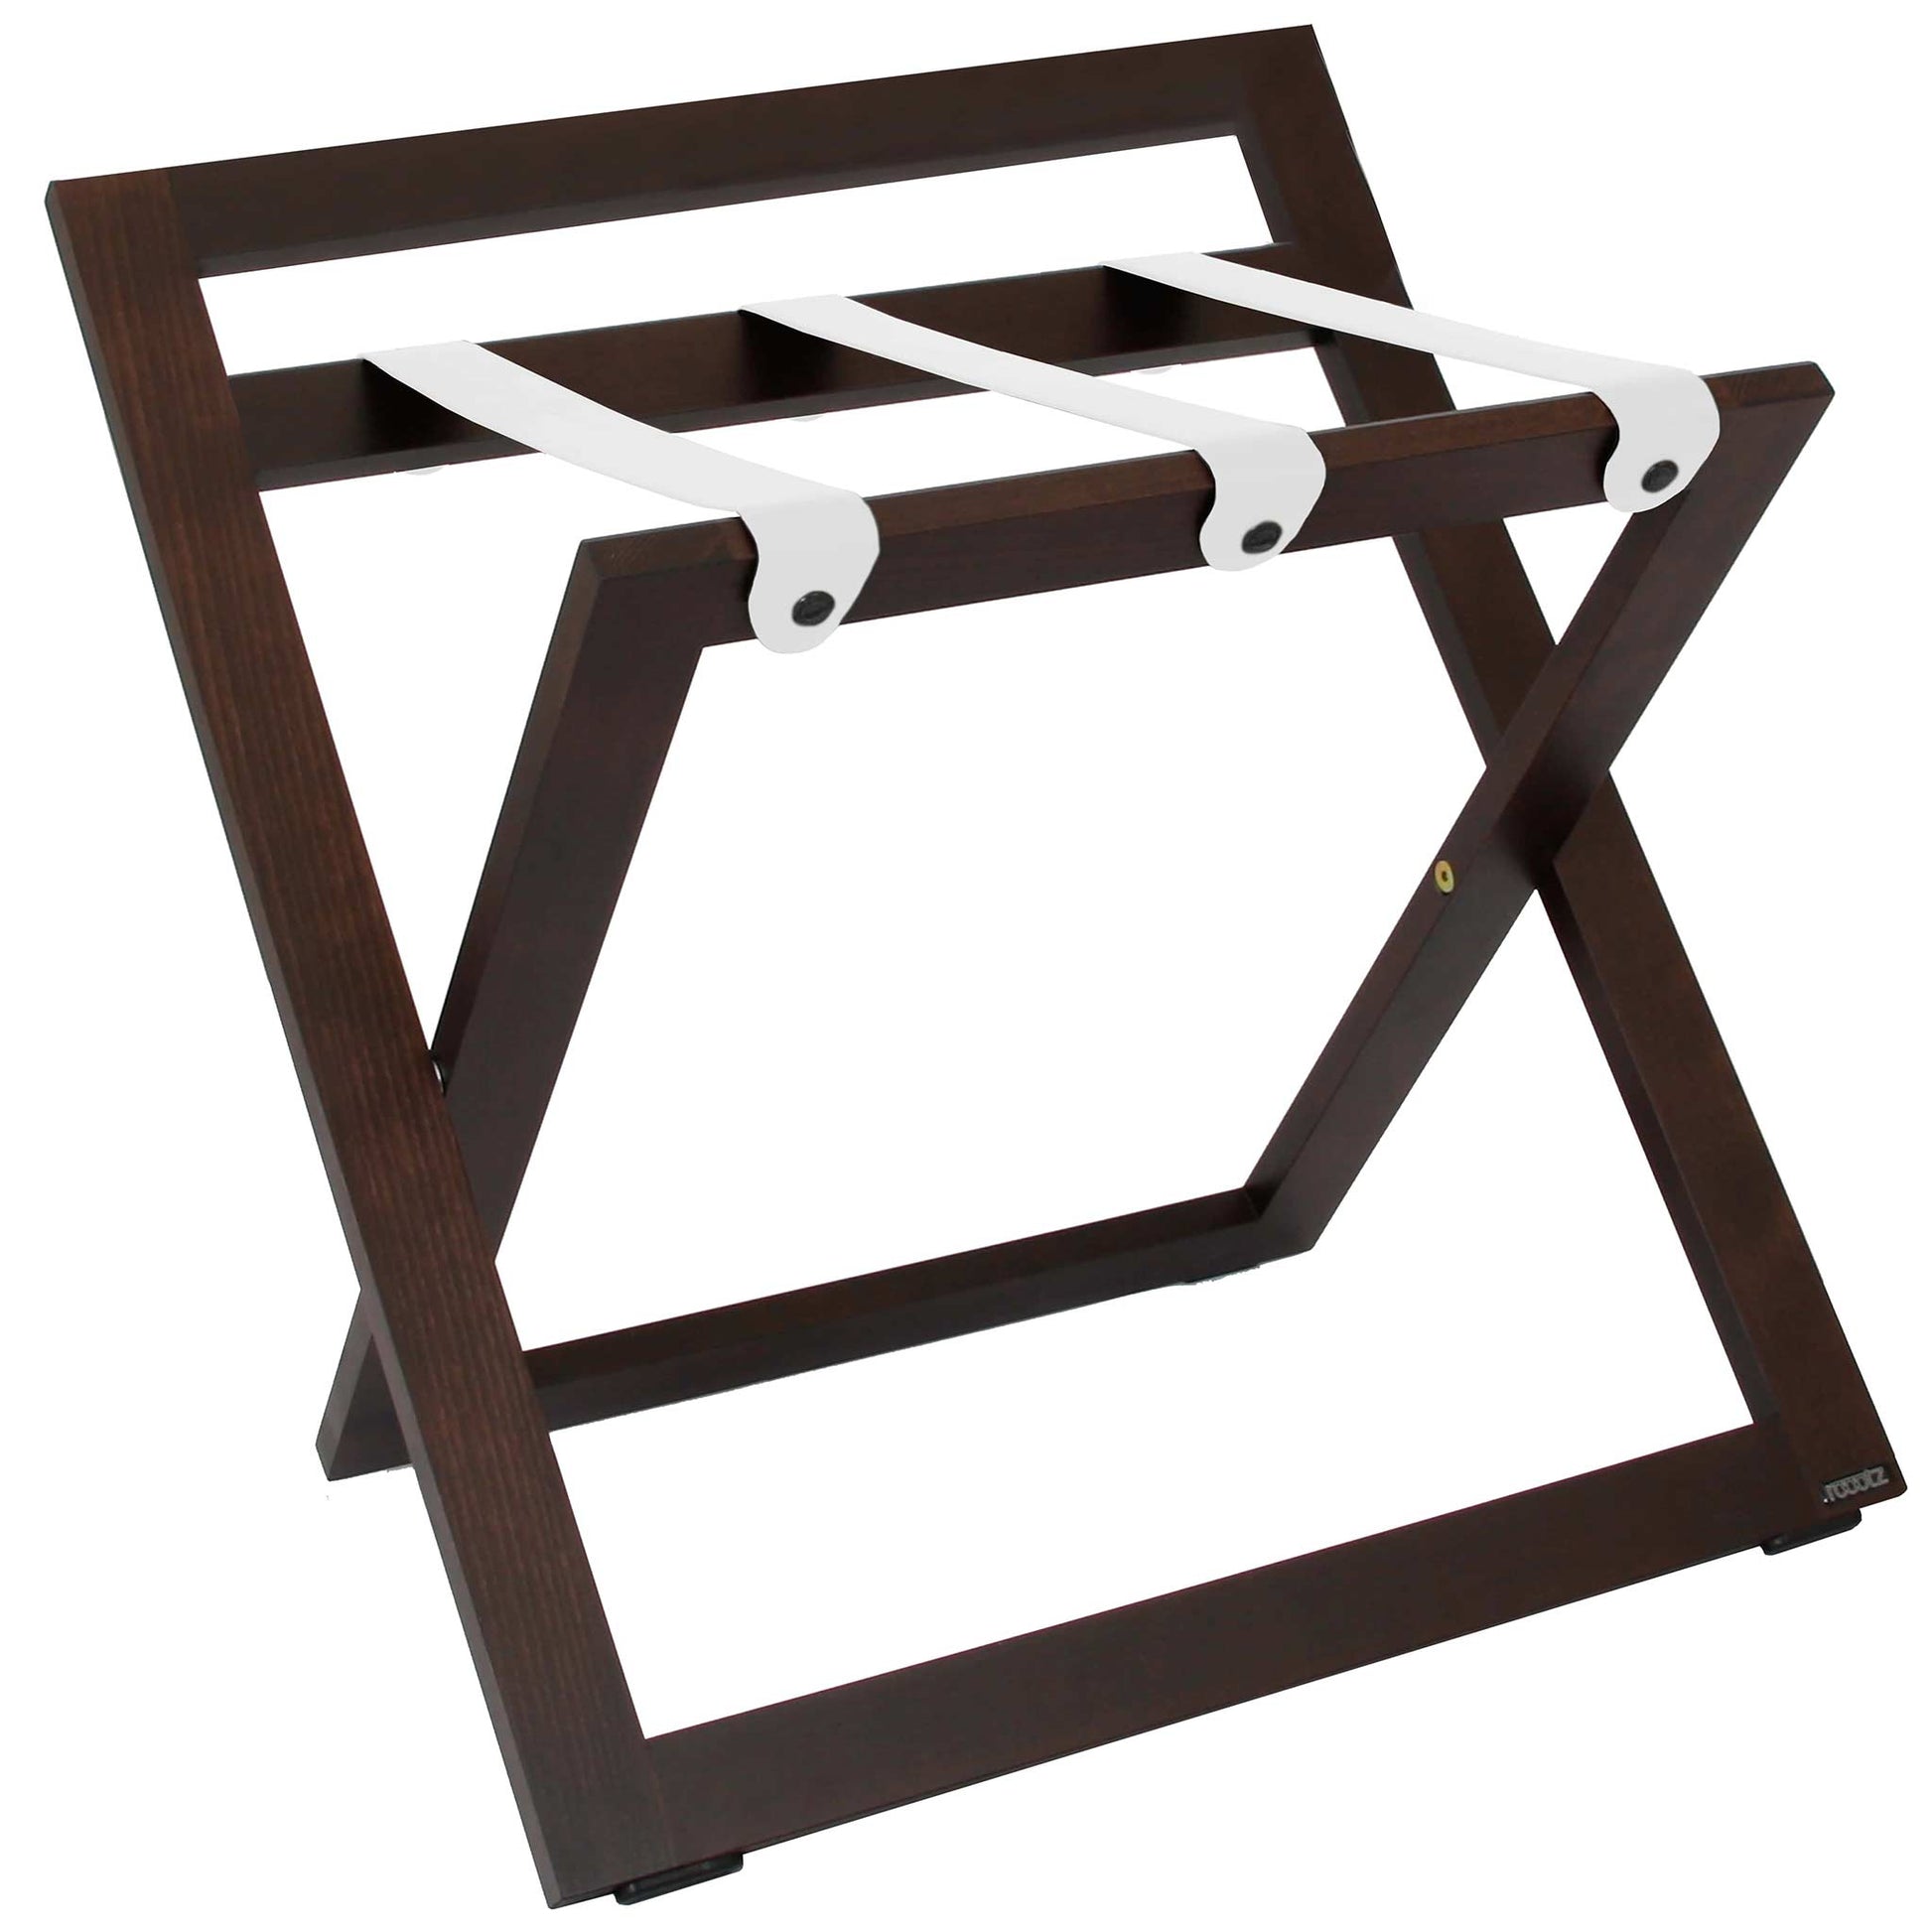 Roootz compact walnut wooden hotel luggage rack with white leather straps and backstand